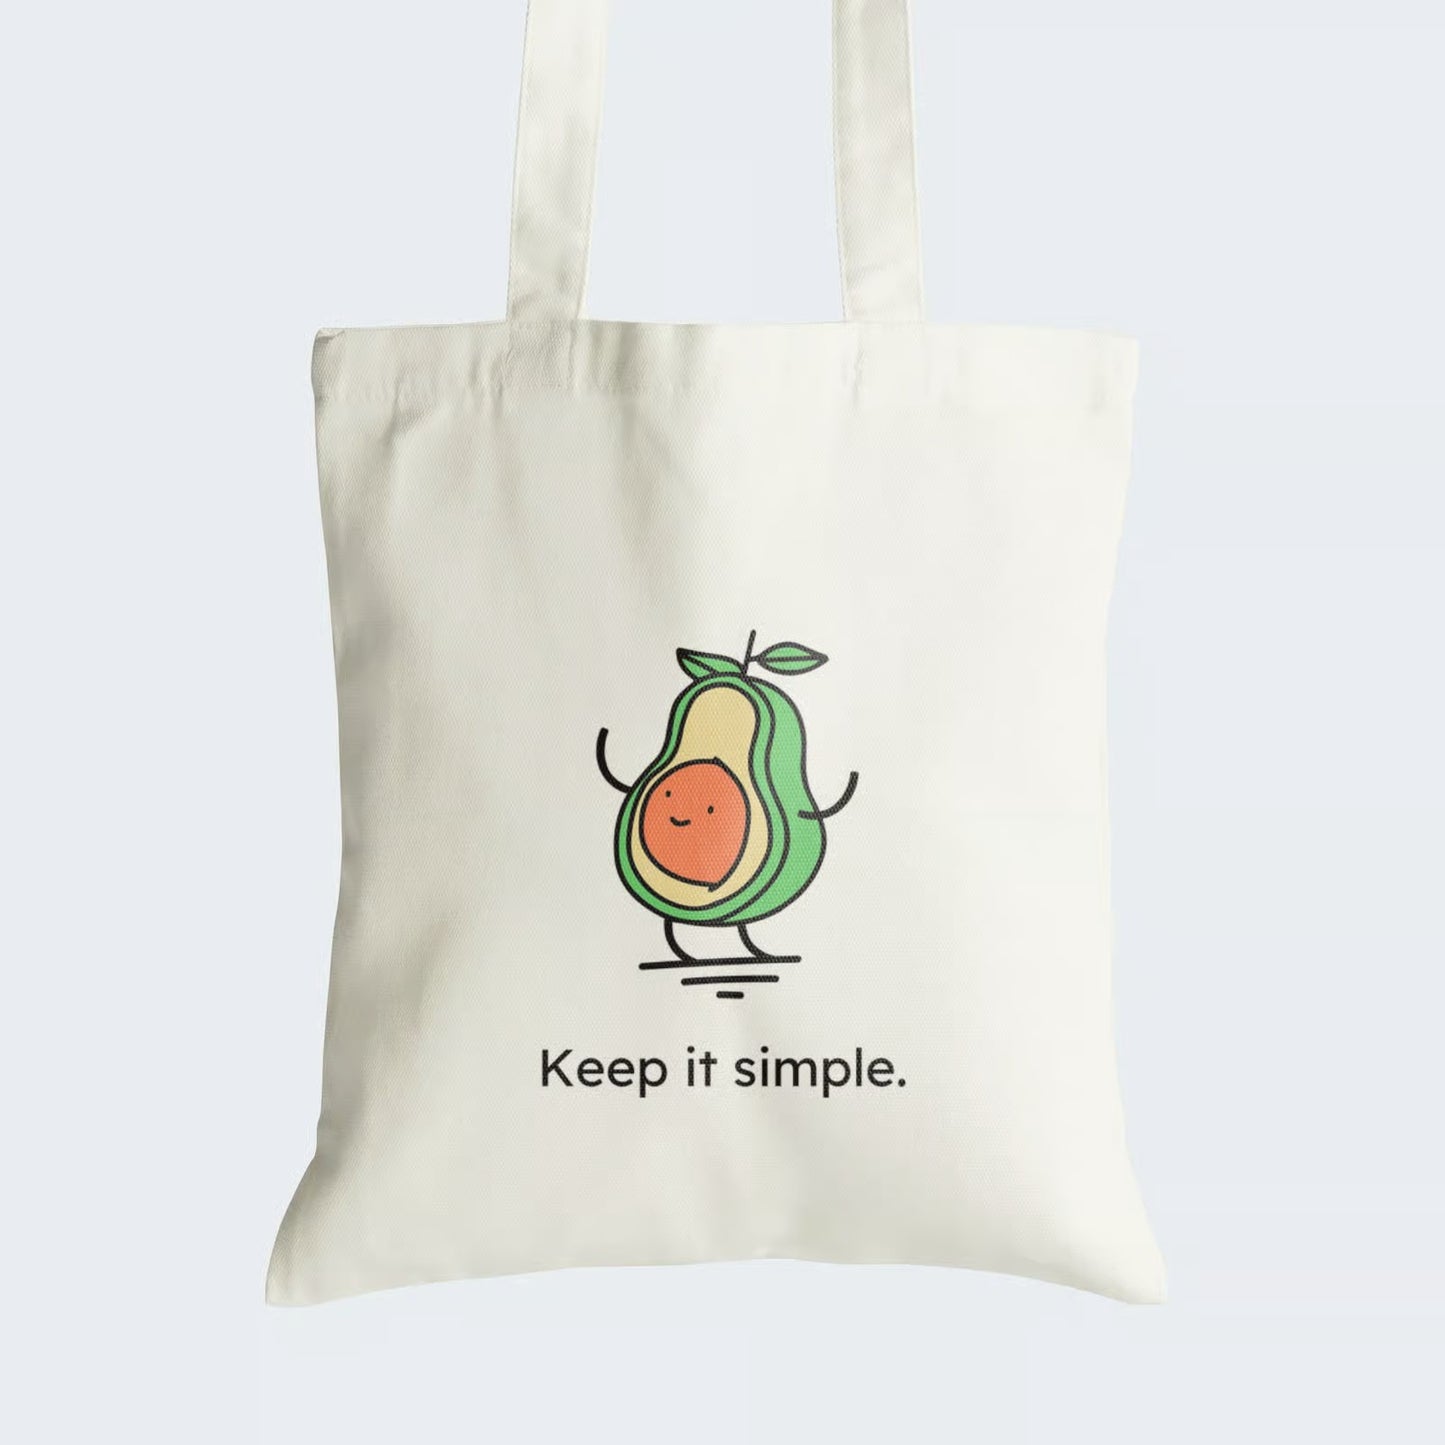 Elevate your style with our "Keep it Simple" Cotton Canvas Tote Bag, a whimsical work of art. This tote features a charming graphic design of a half avocado with arms, legs, and a joyful smile on its seed, capturing the essence of simplicity. Crafted for durability and style, it includes a secure zipper closure for daily convenience. Carry the message of embracing life's joys with our unique Cotton Canvas Tote Bag. Order yours today!